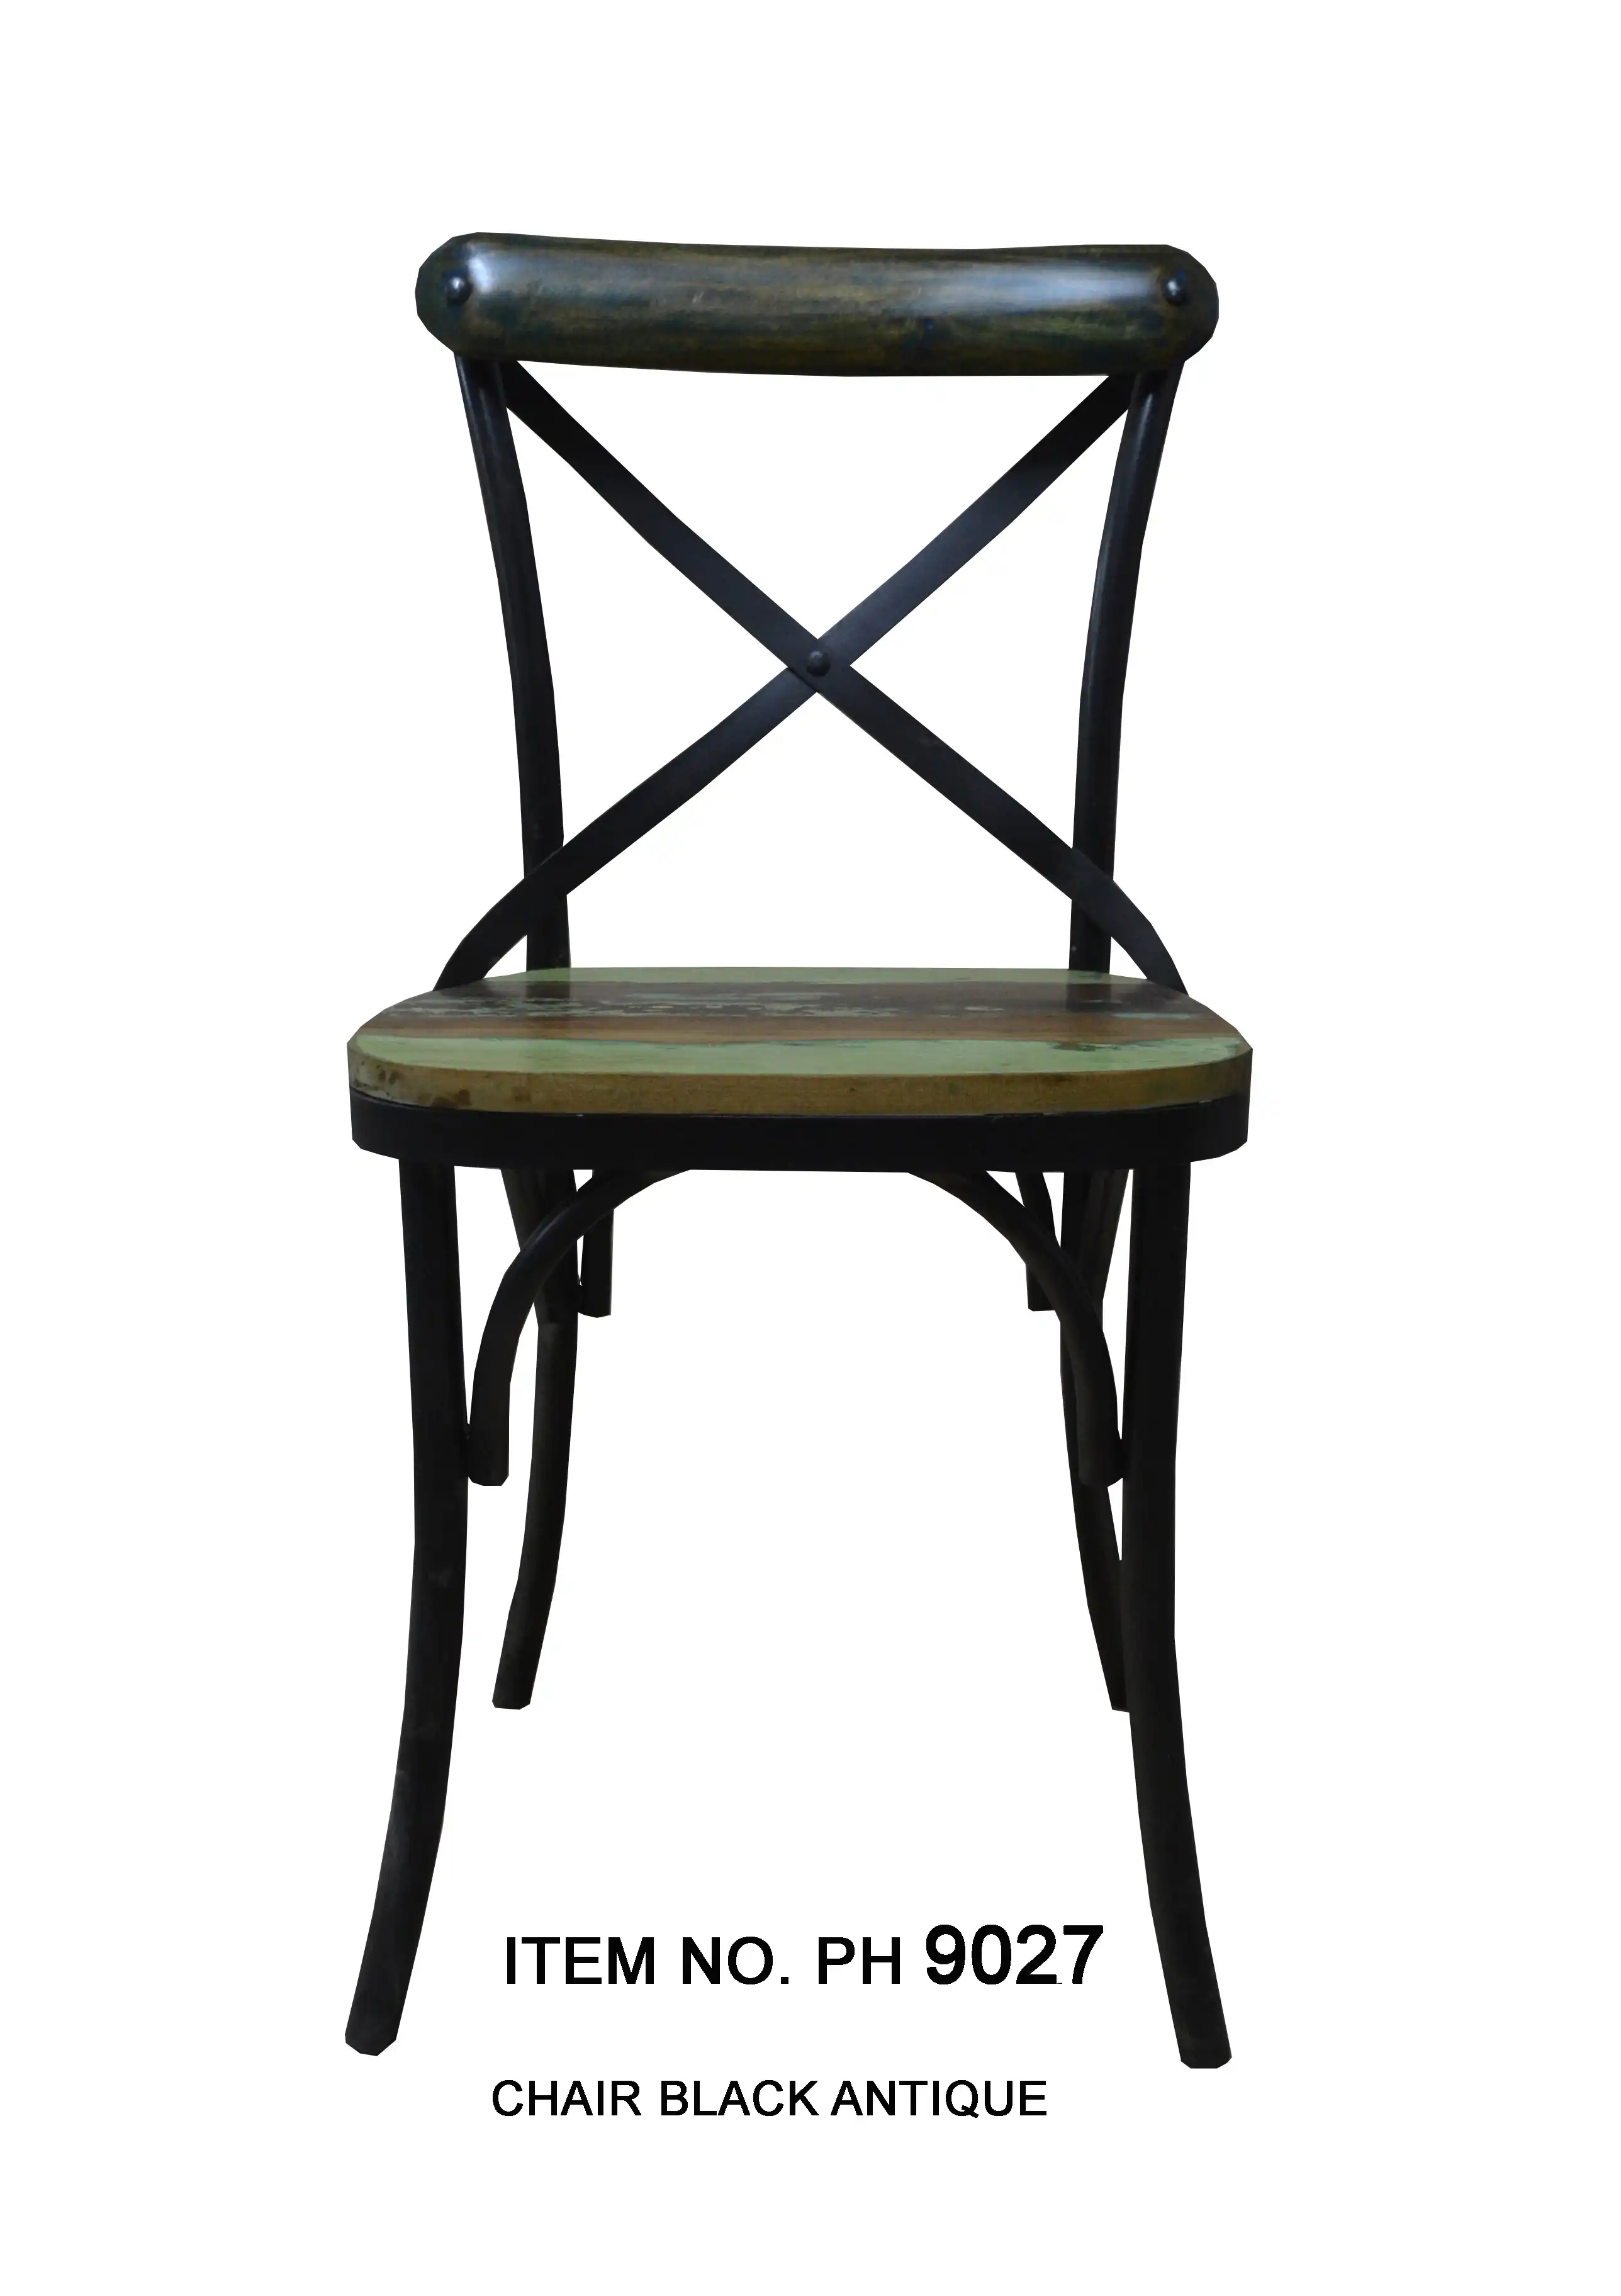 Iron Chair with Wooden Seat
Set of 2 - popular handicrafts